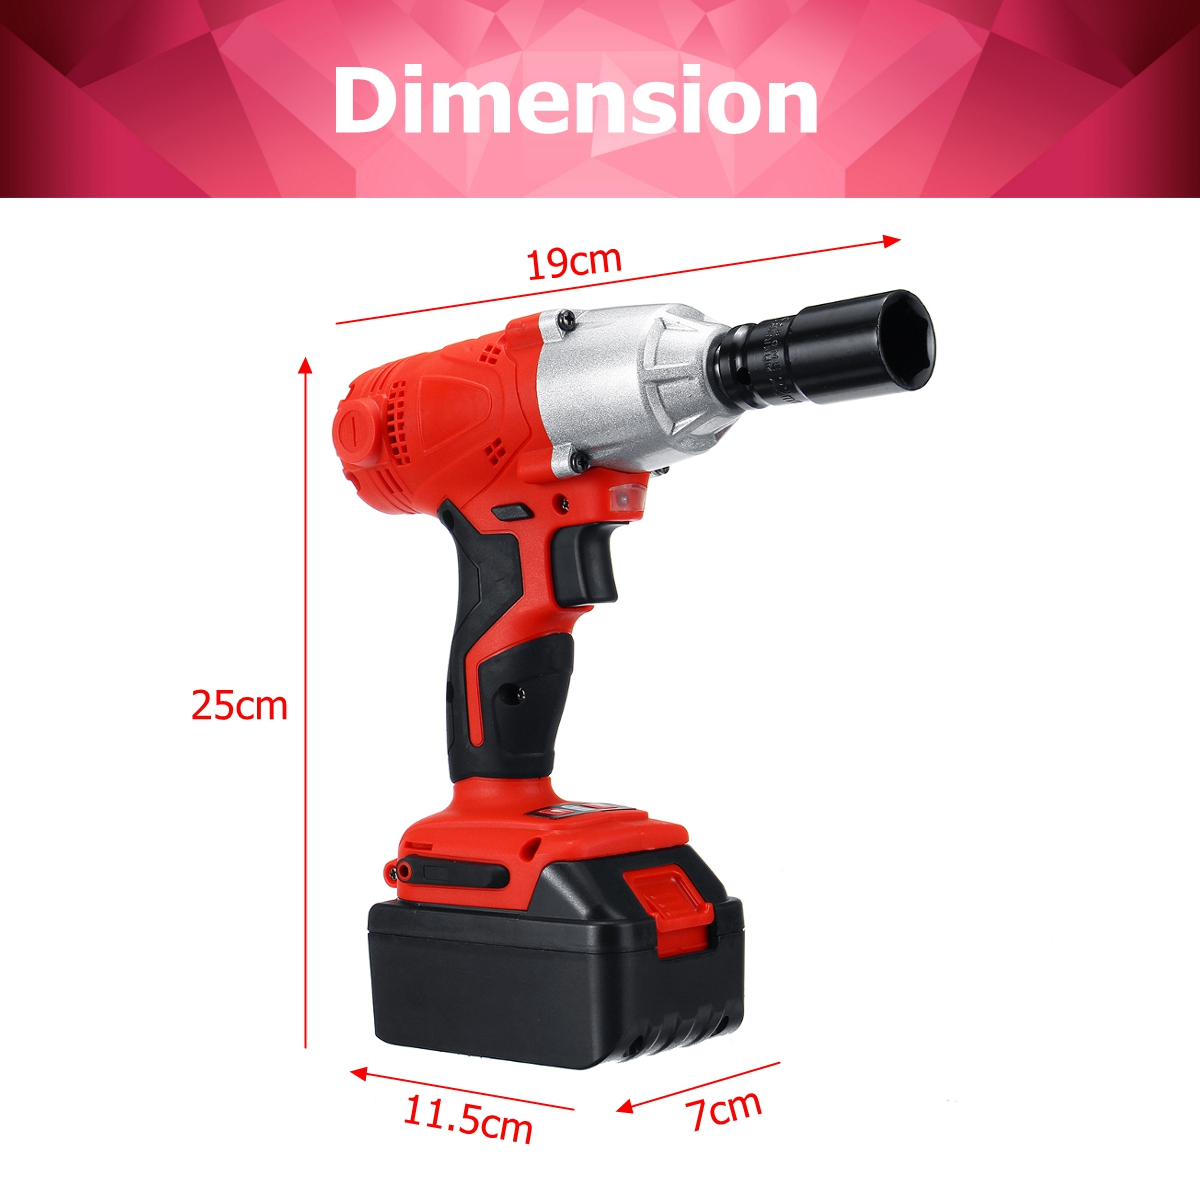 128VF188VF-Electric-Wrench-350Nm-High-Torque-Impact-Wrench-Cordless-12-Batteries-1-Charger-1431843-7